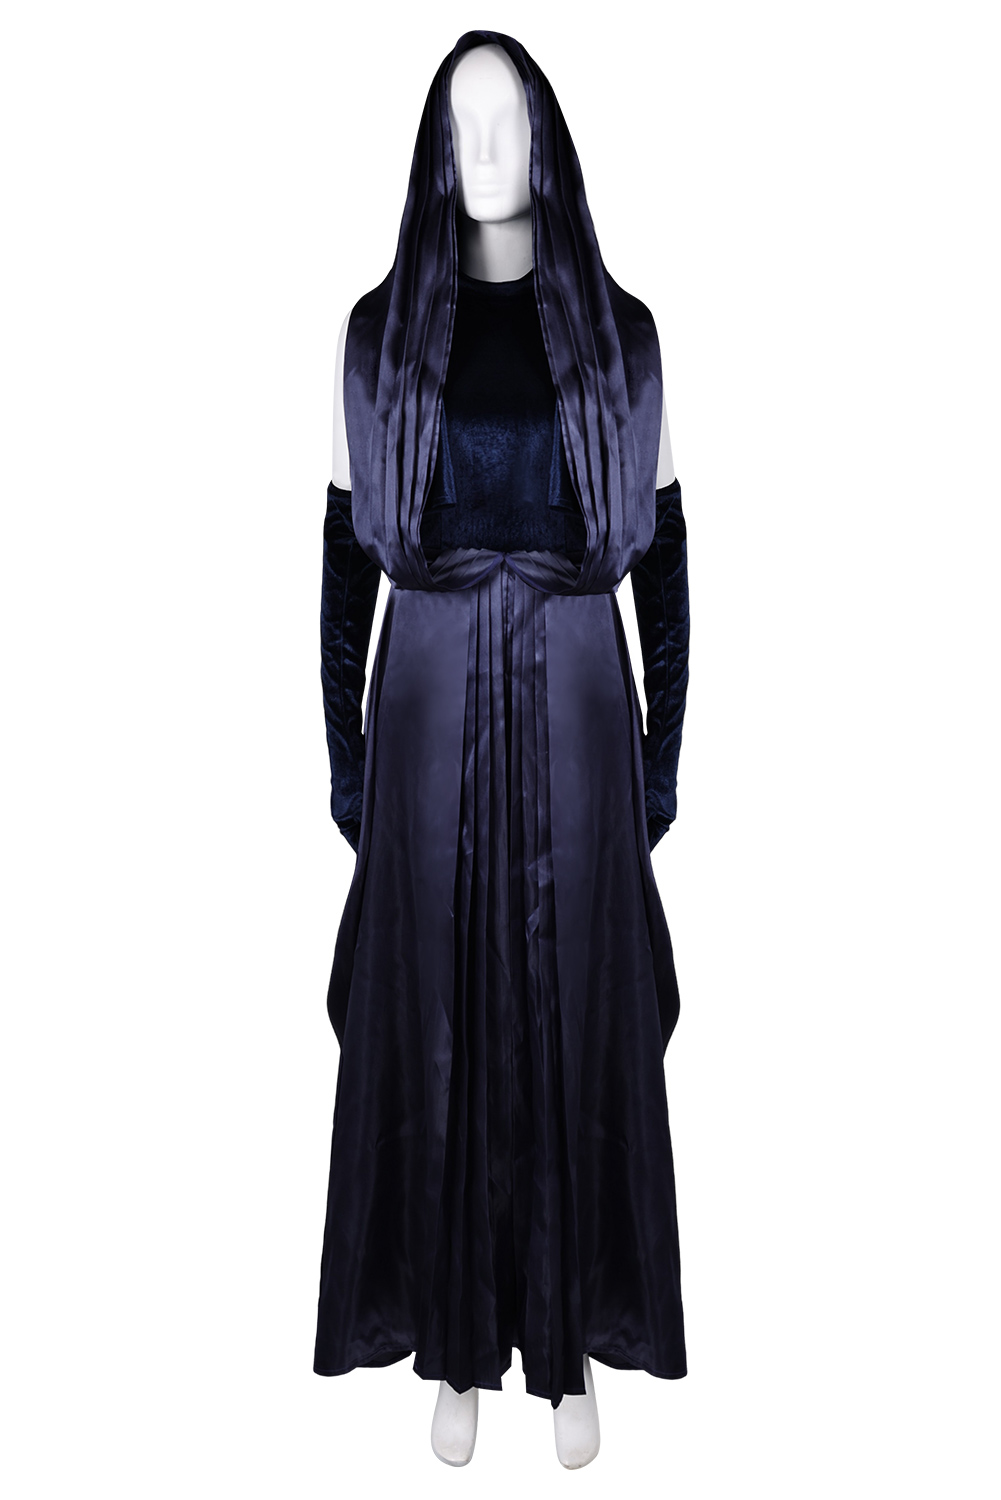 Movie Dune: Part Two 2024 Lady Jessica Atreides Outfits With Gloves Halloween Carnival Suit Cosplay Costume